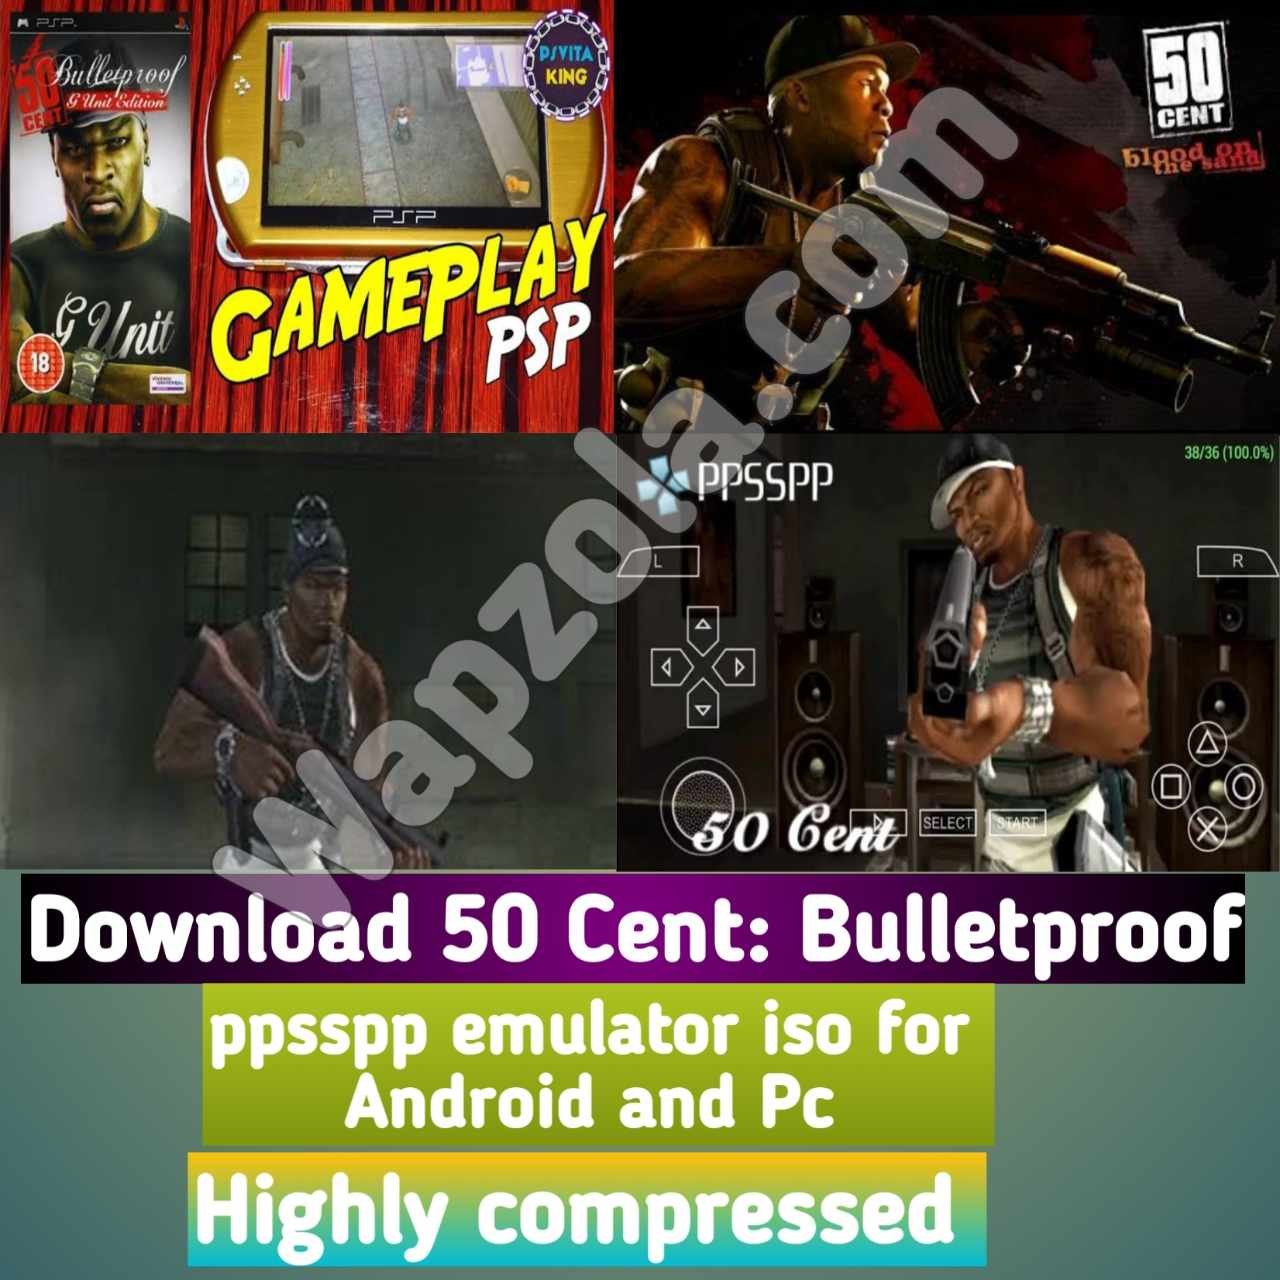 50cent-bulletproof-highly-compressed-ppsspp-iso-highly-compressed